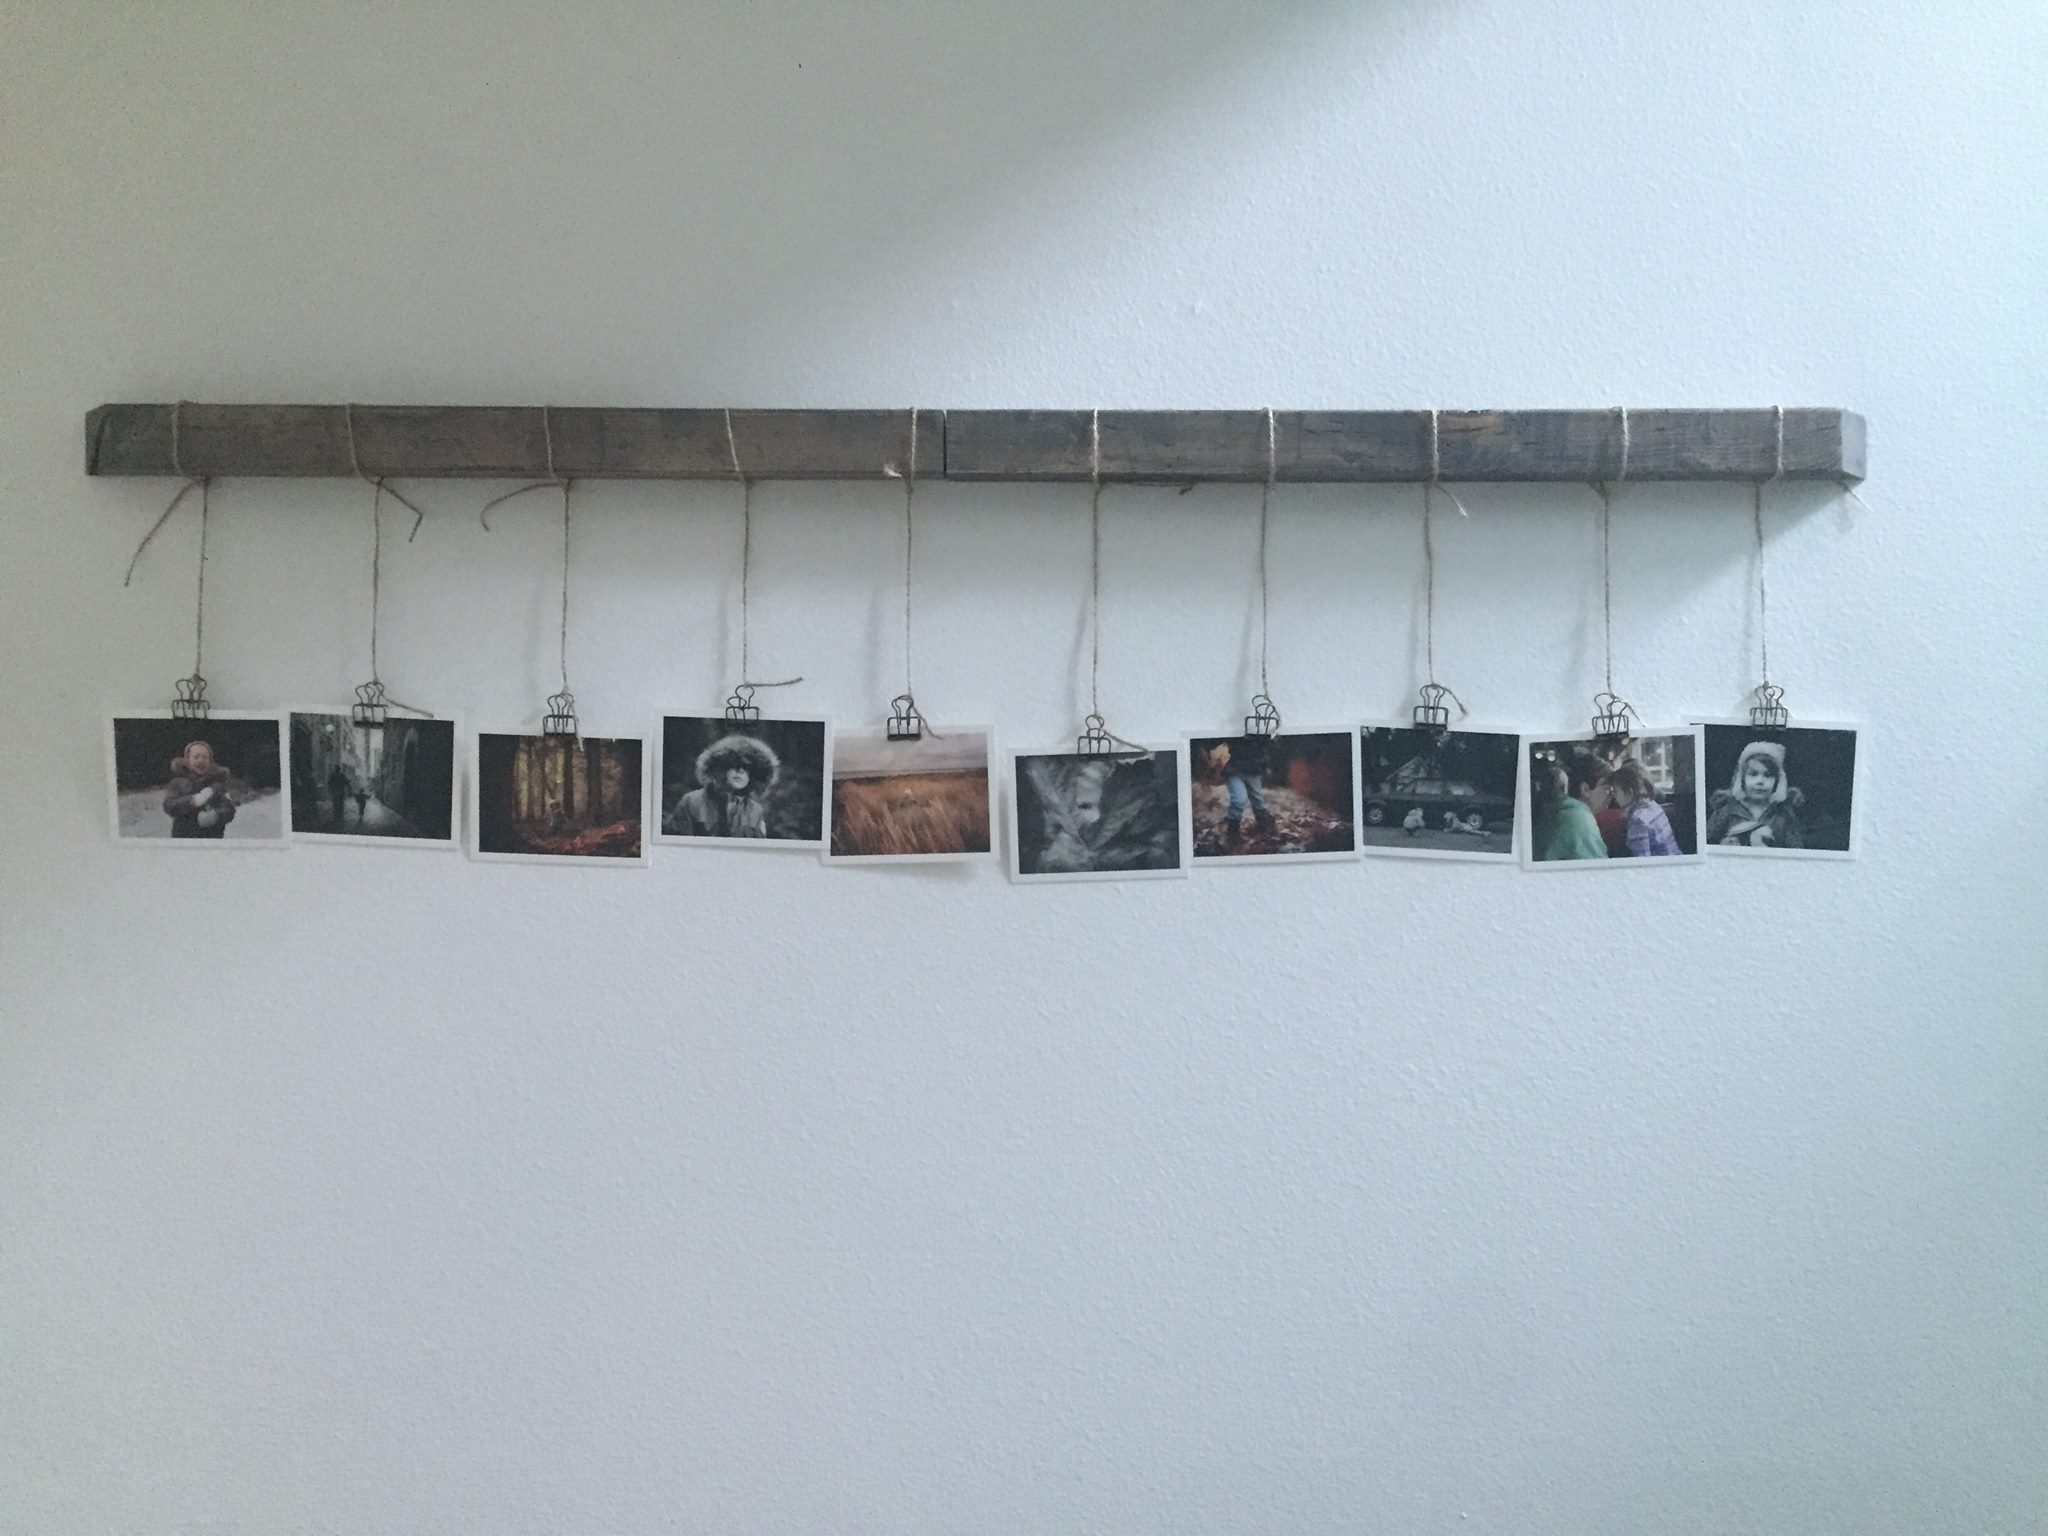 5 Great Ways To Display Your Family Photos From Your Phone to Home